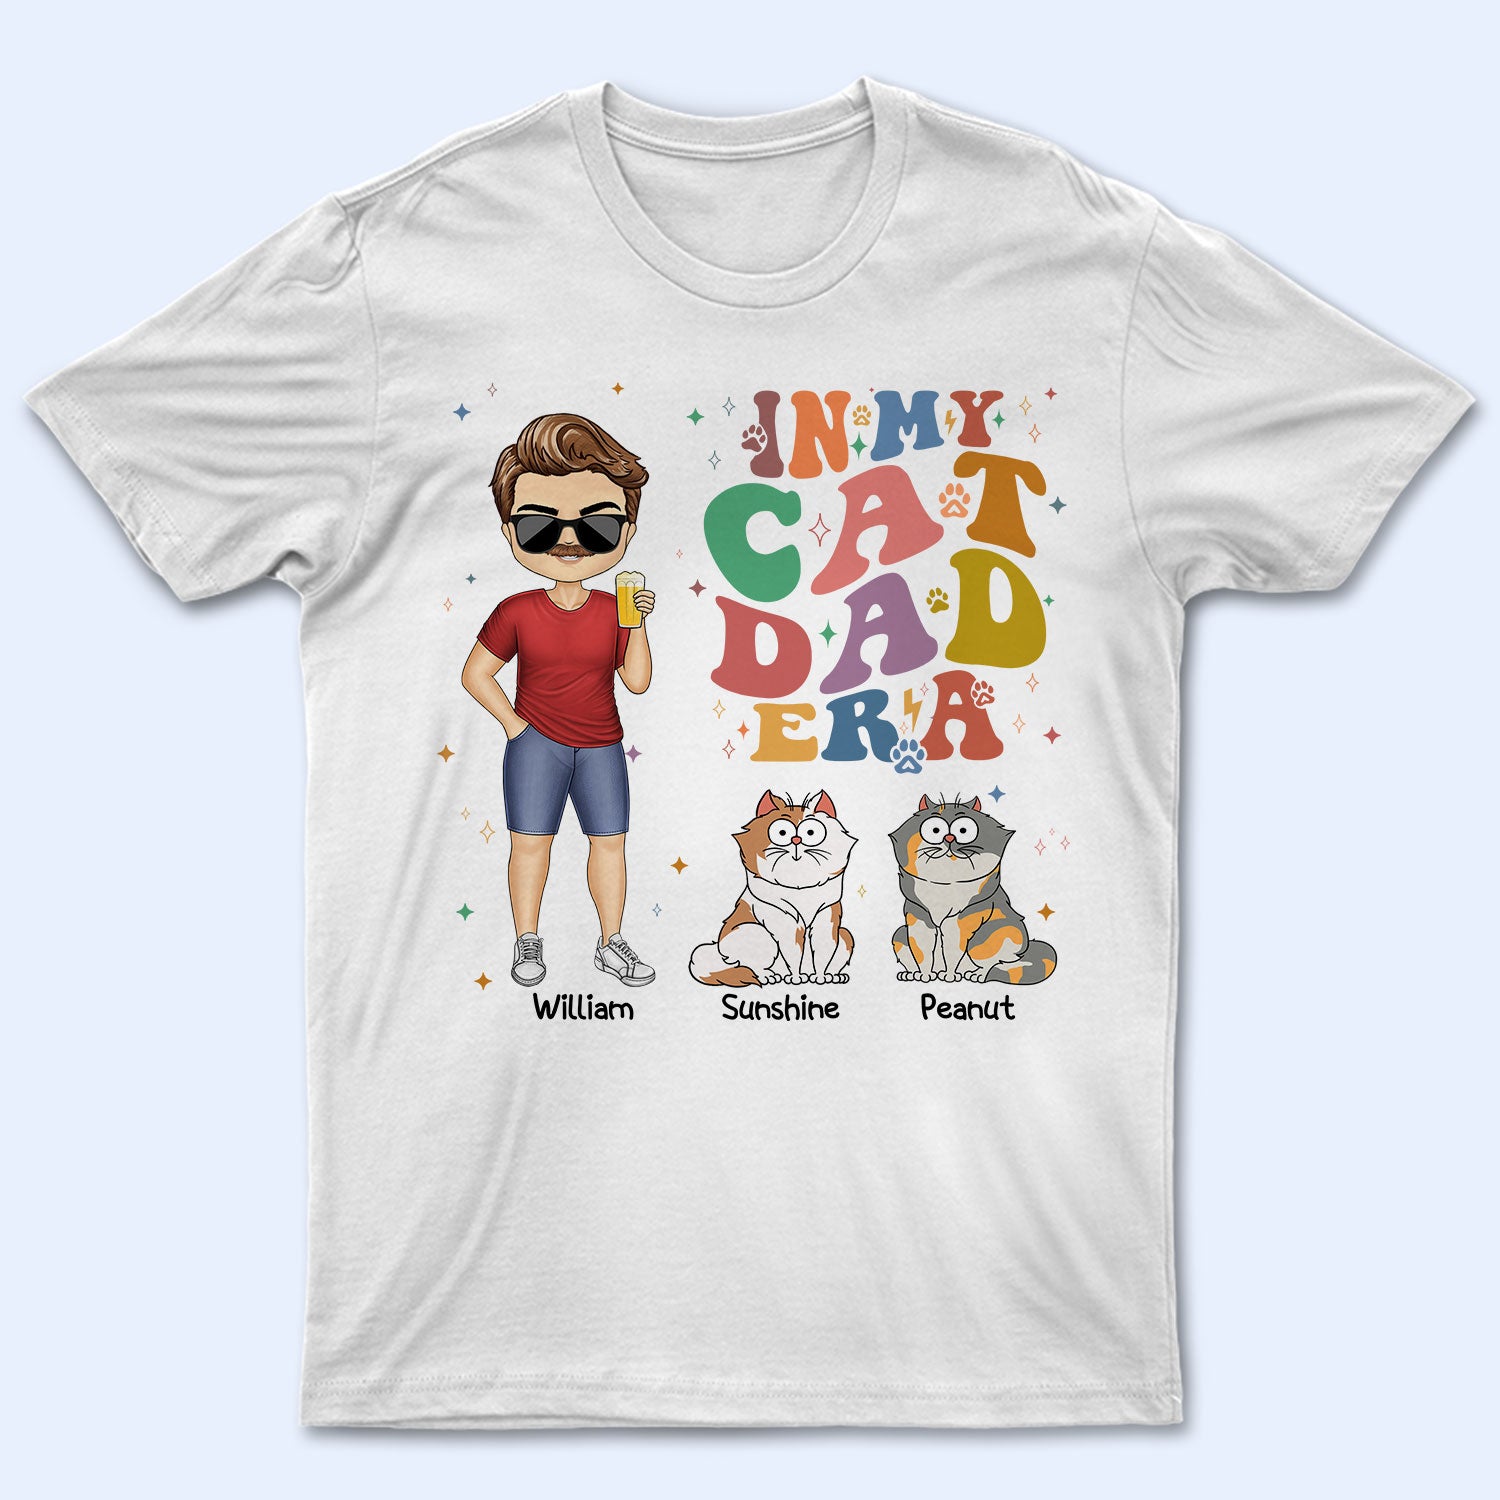 In My Cat Dad Era - Personalized T Shirt